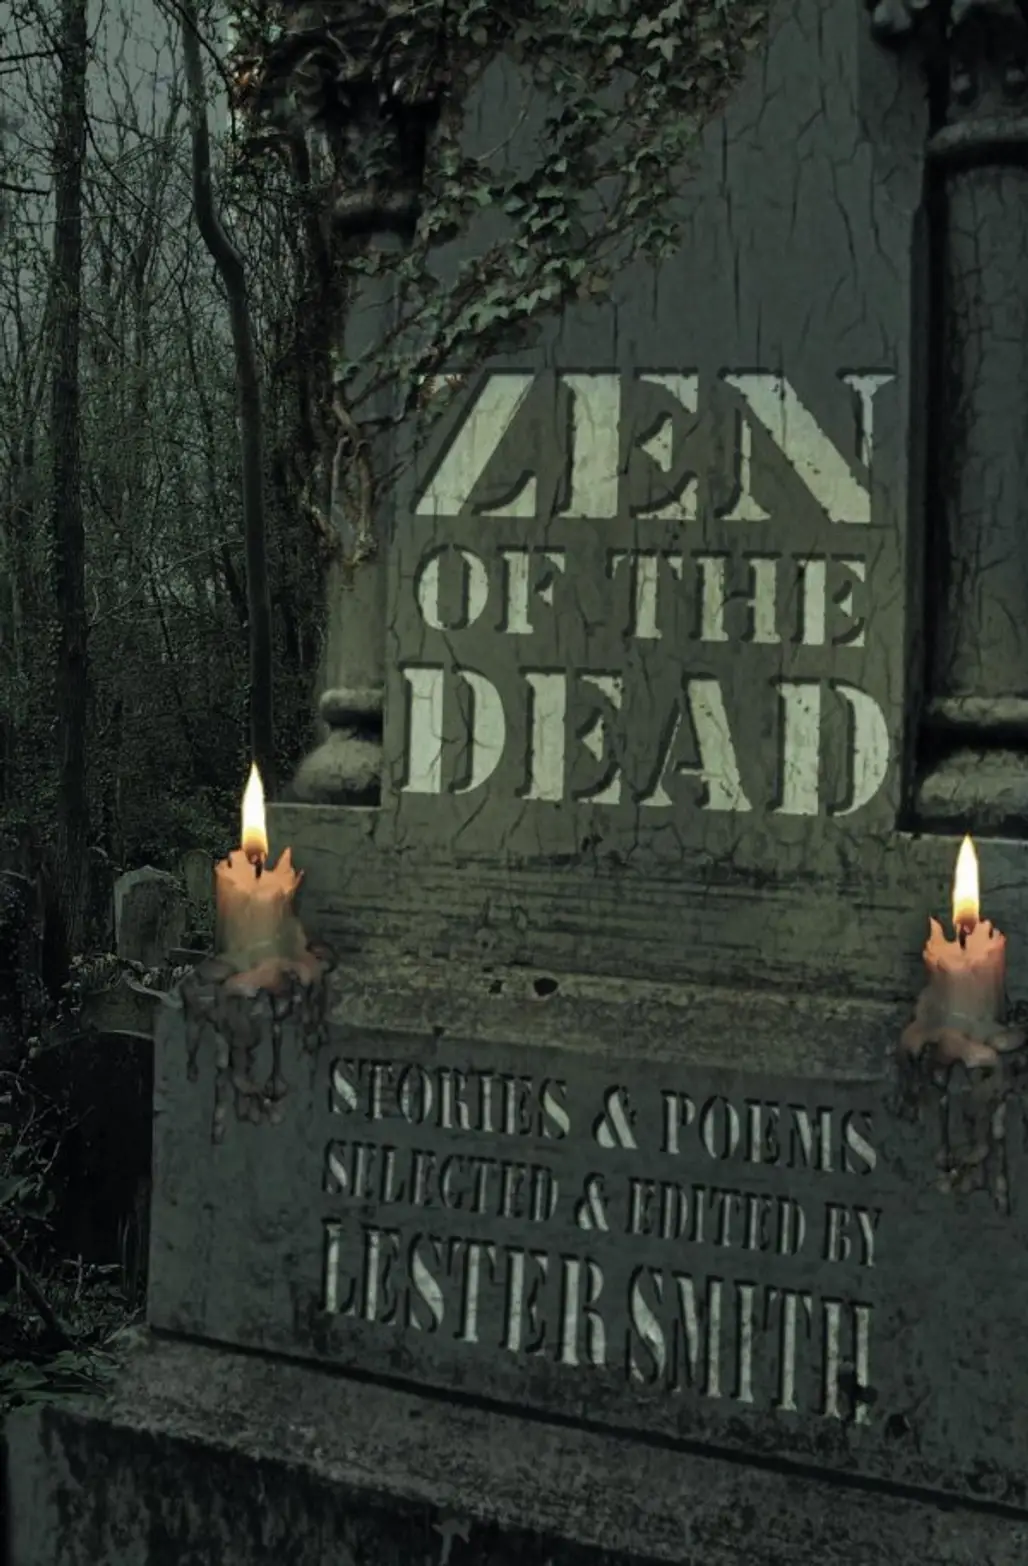 Zen of the Dead by Various Authors (including Me!)